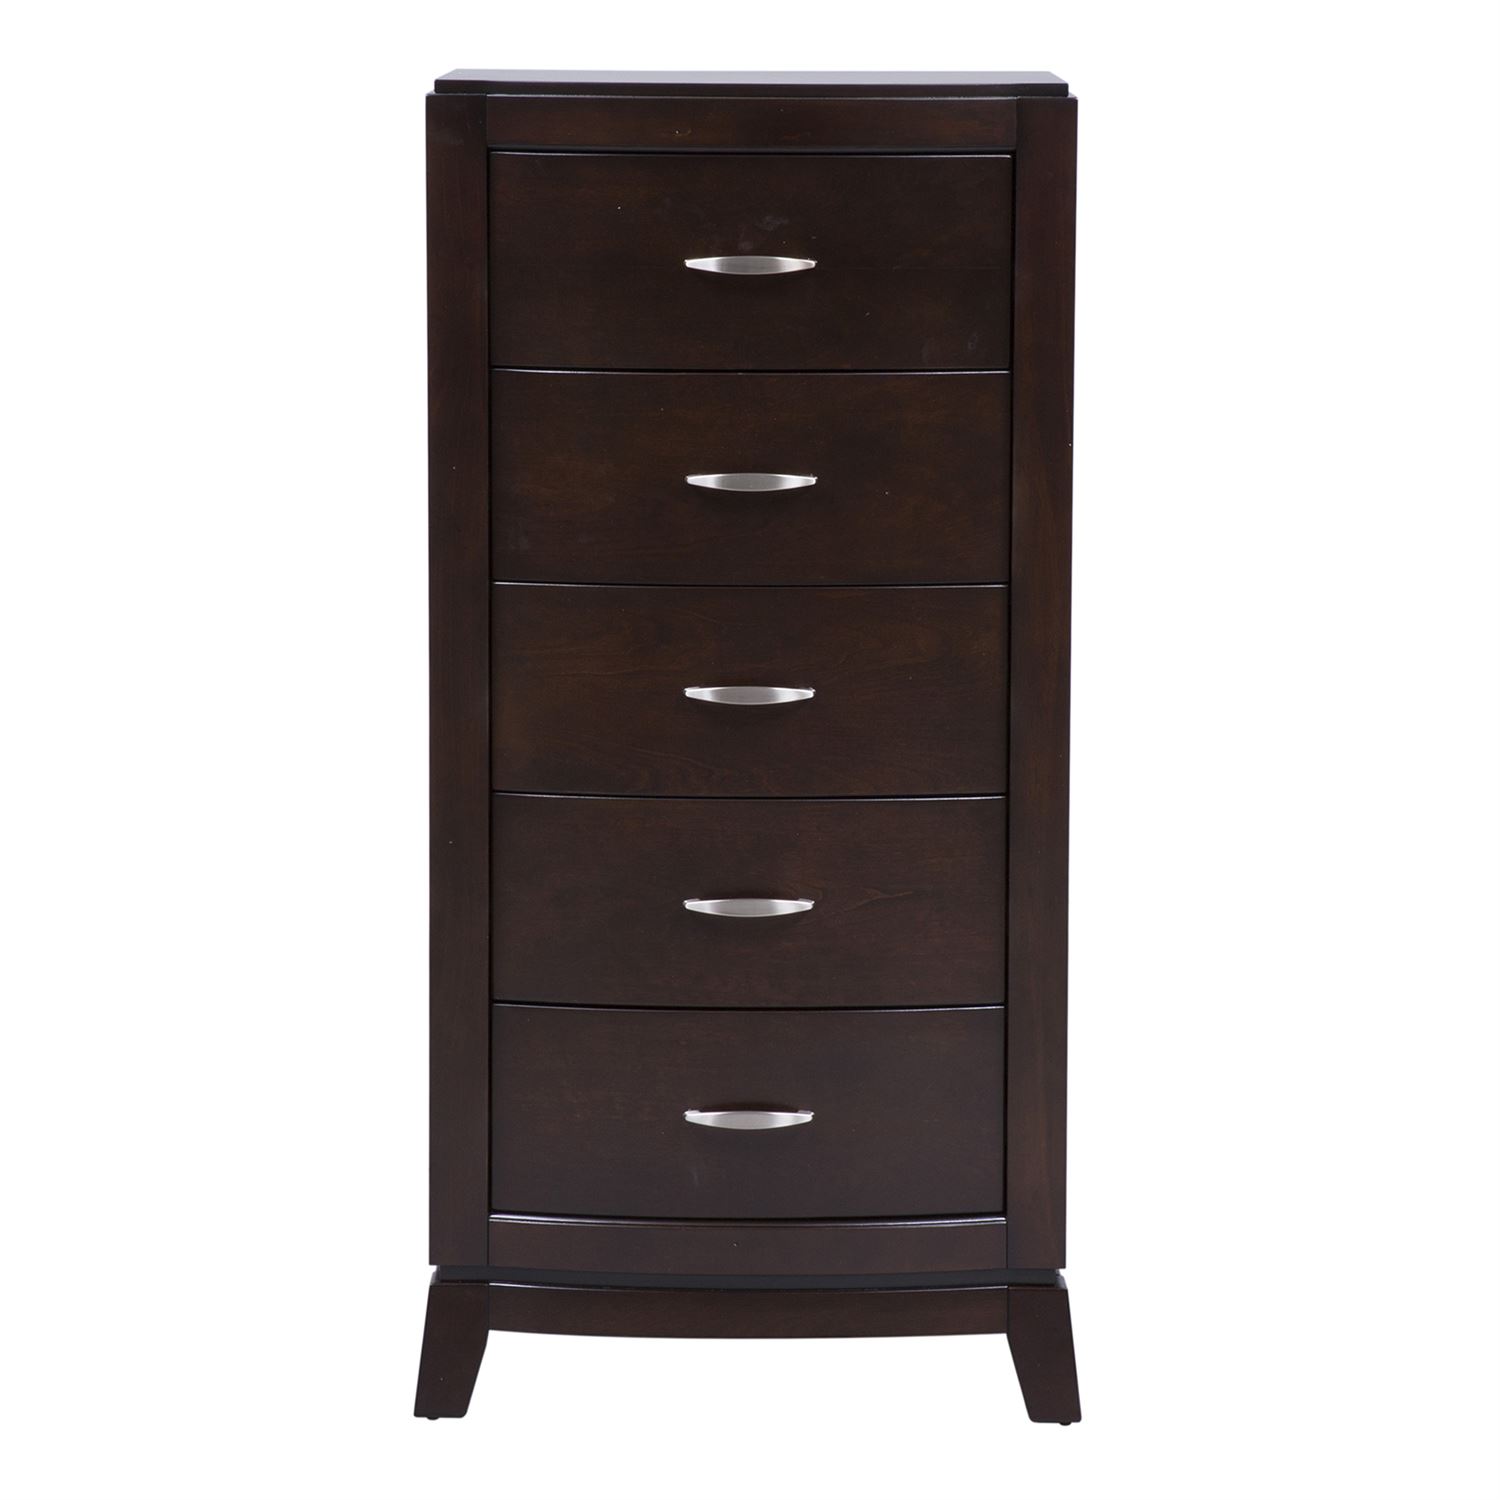 Swing Lingerie Chest 14011100104200 by Avalon Furniture at Kloss Furniture